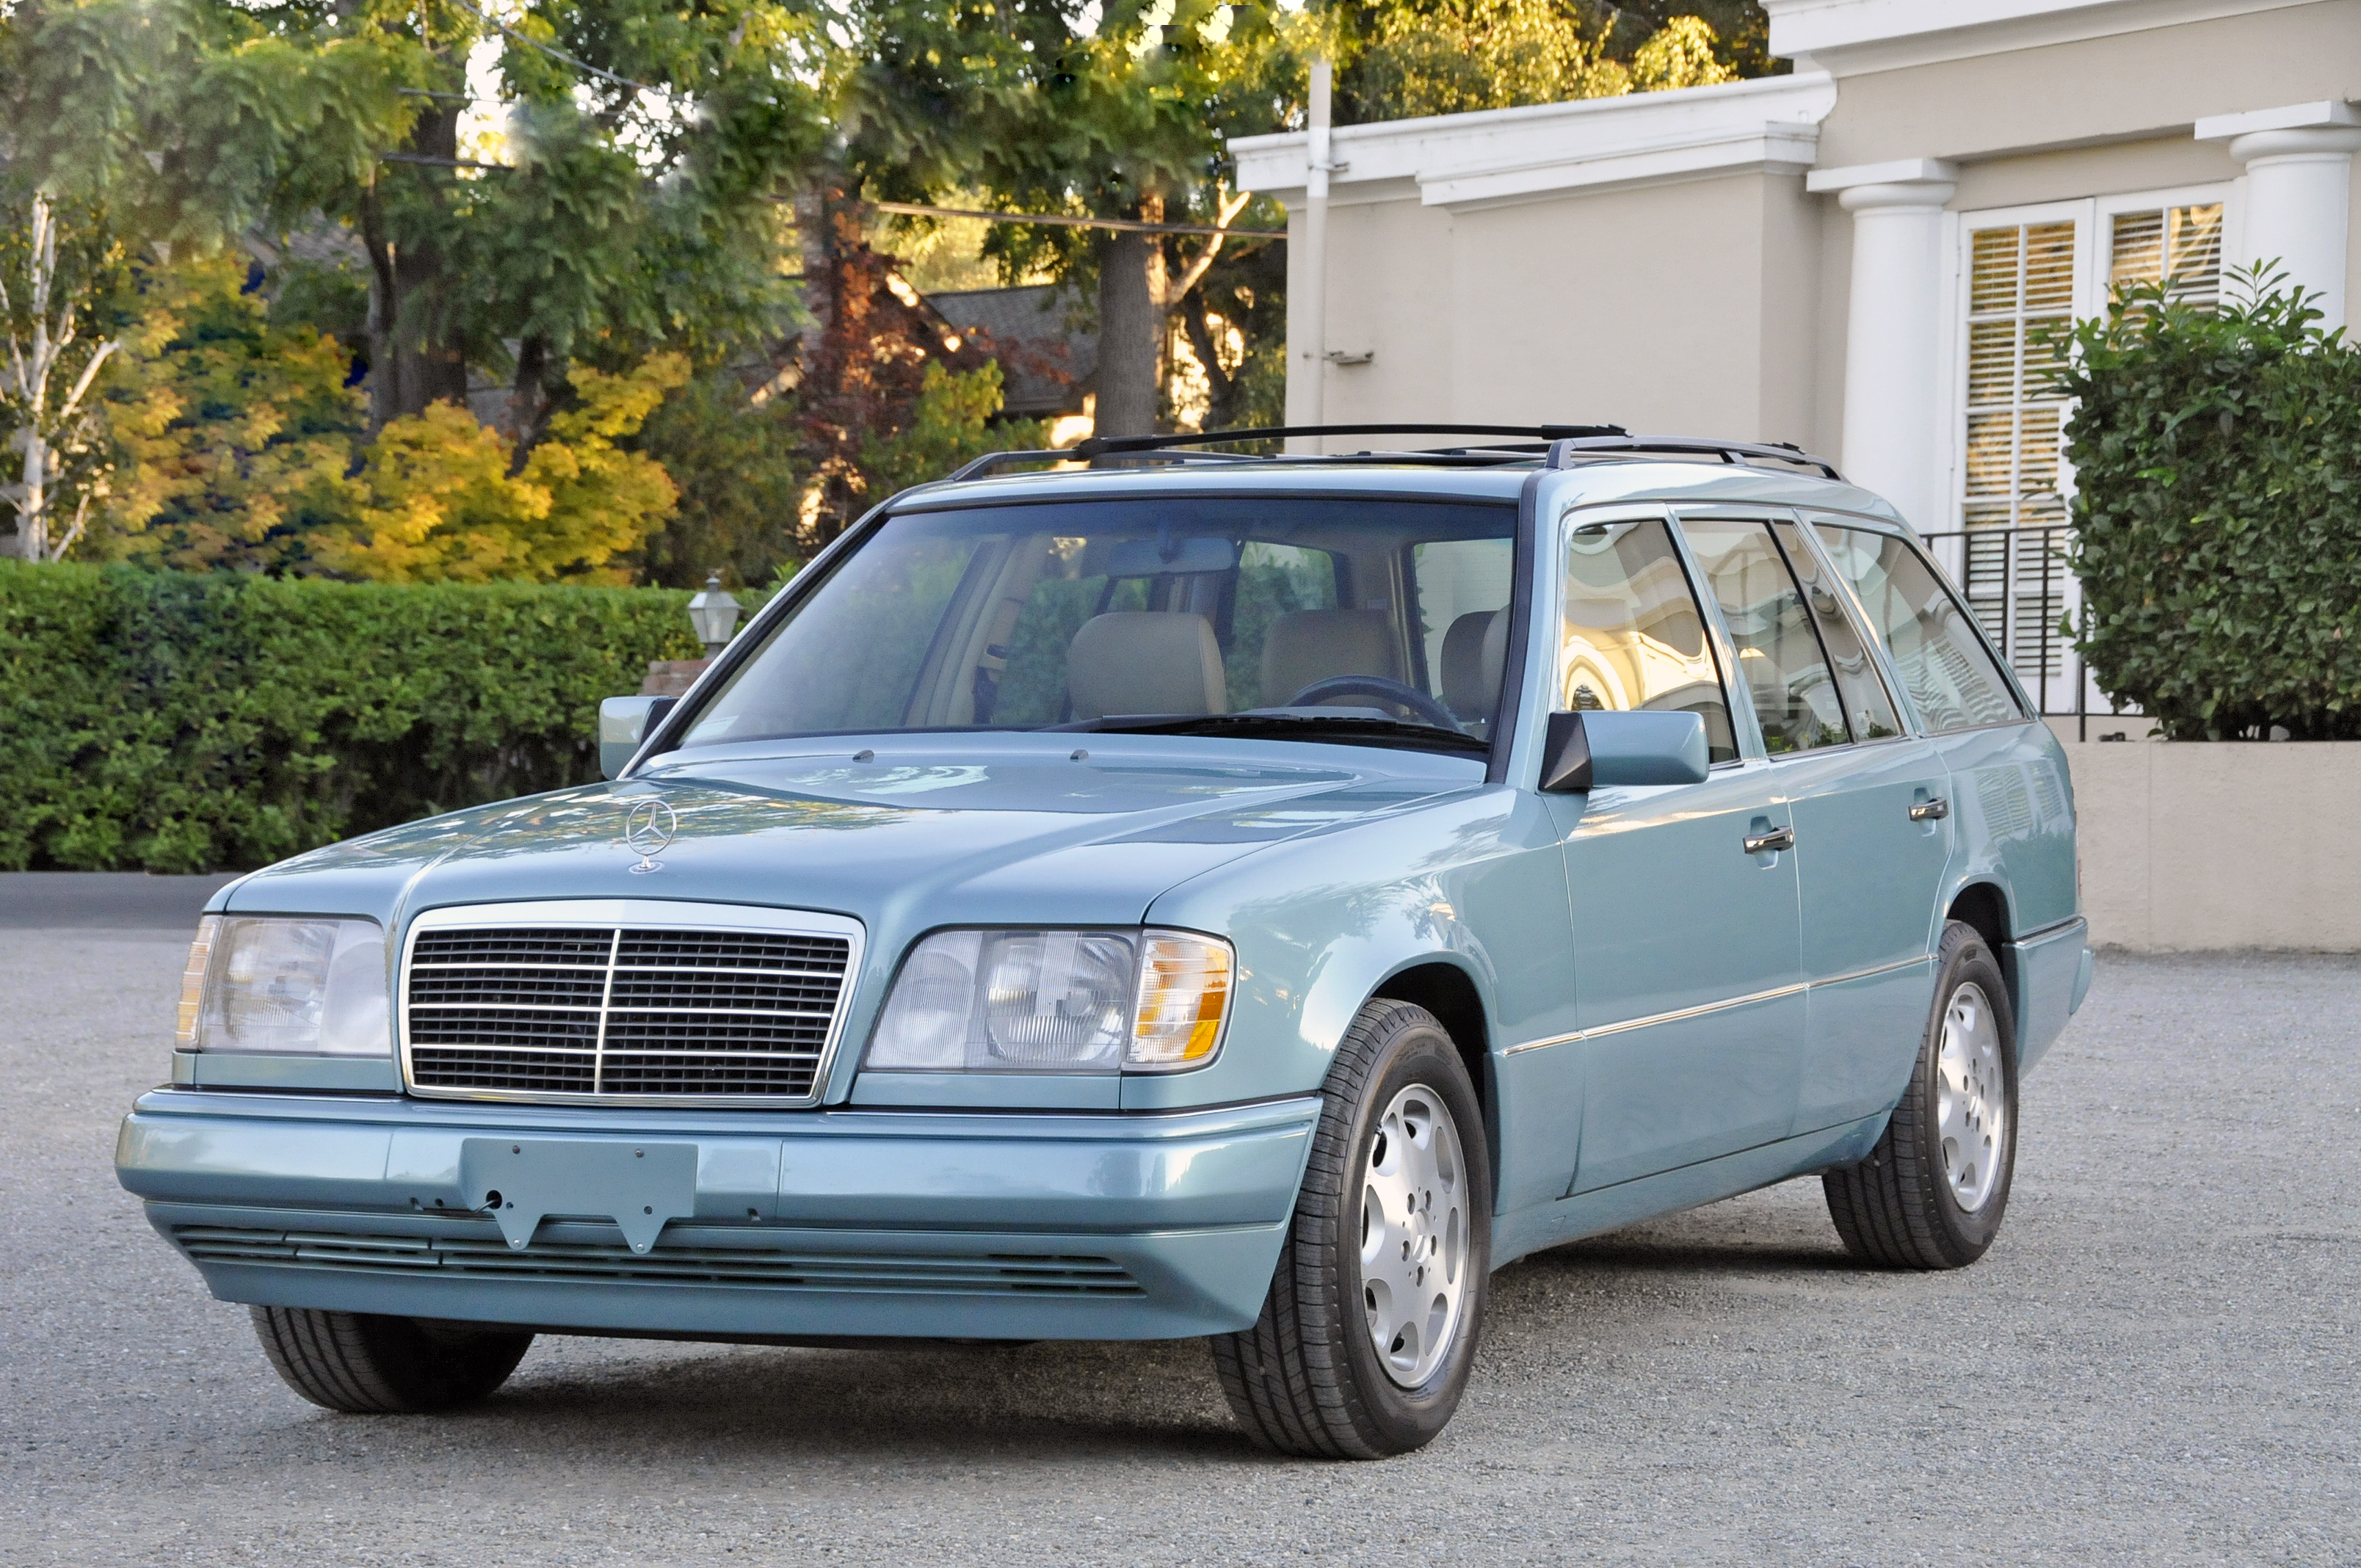 1995 E320 Wagon - Teal/Creme Leather - 58k mi - 3rd Seat - Excellent